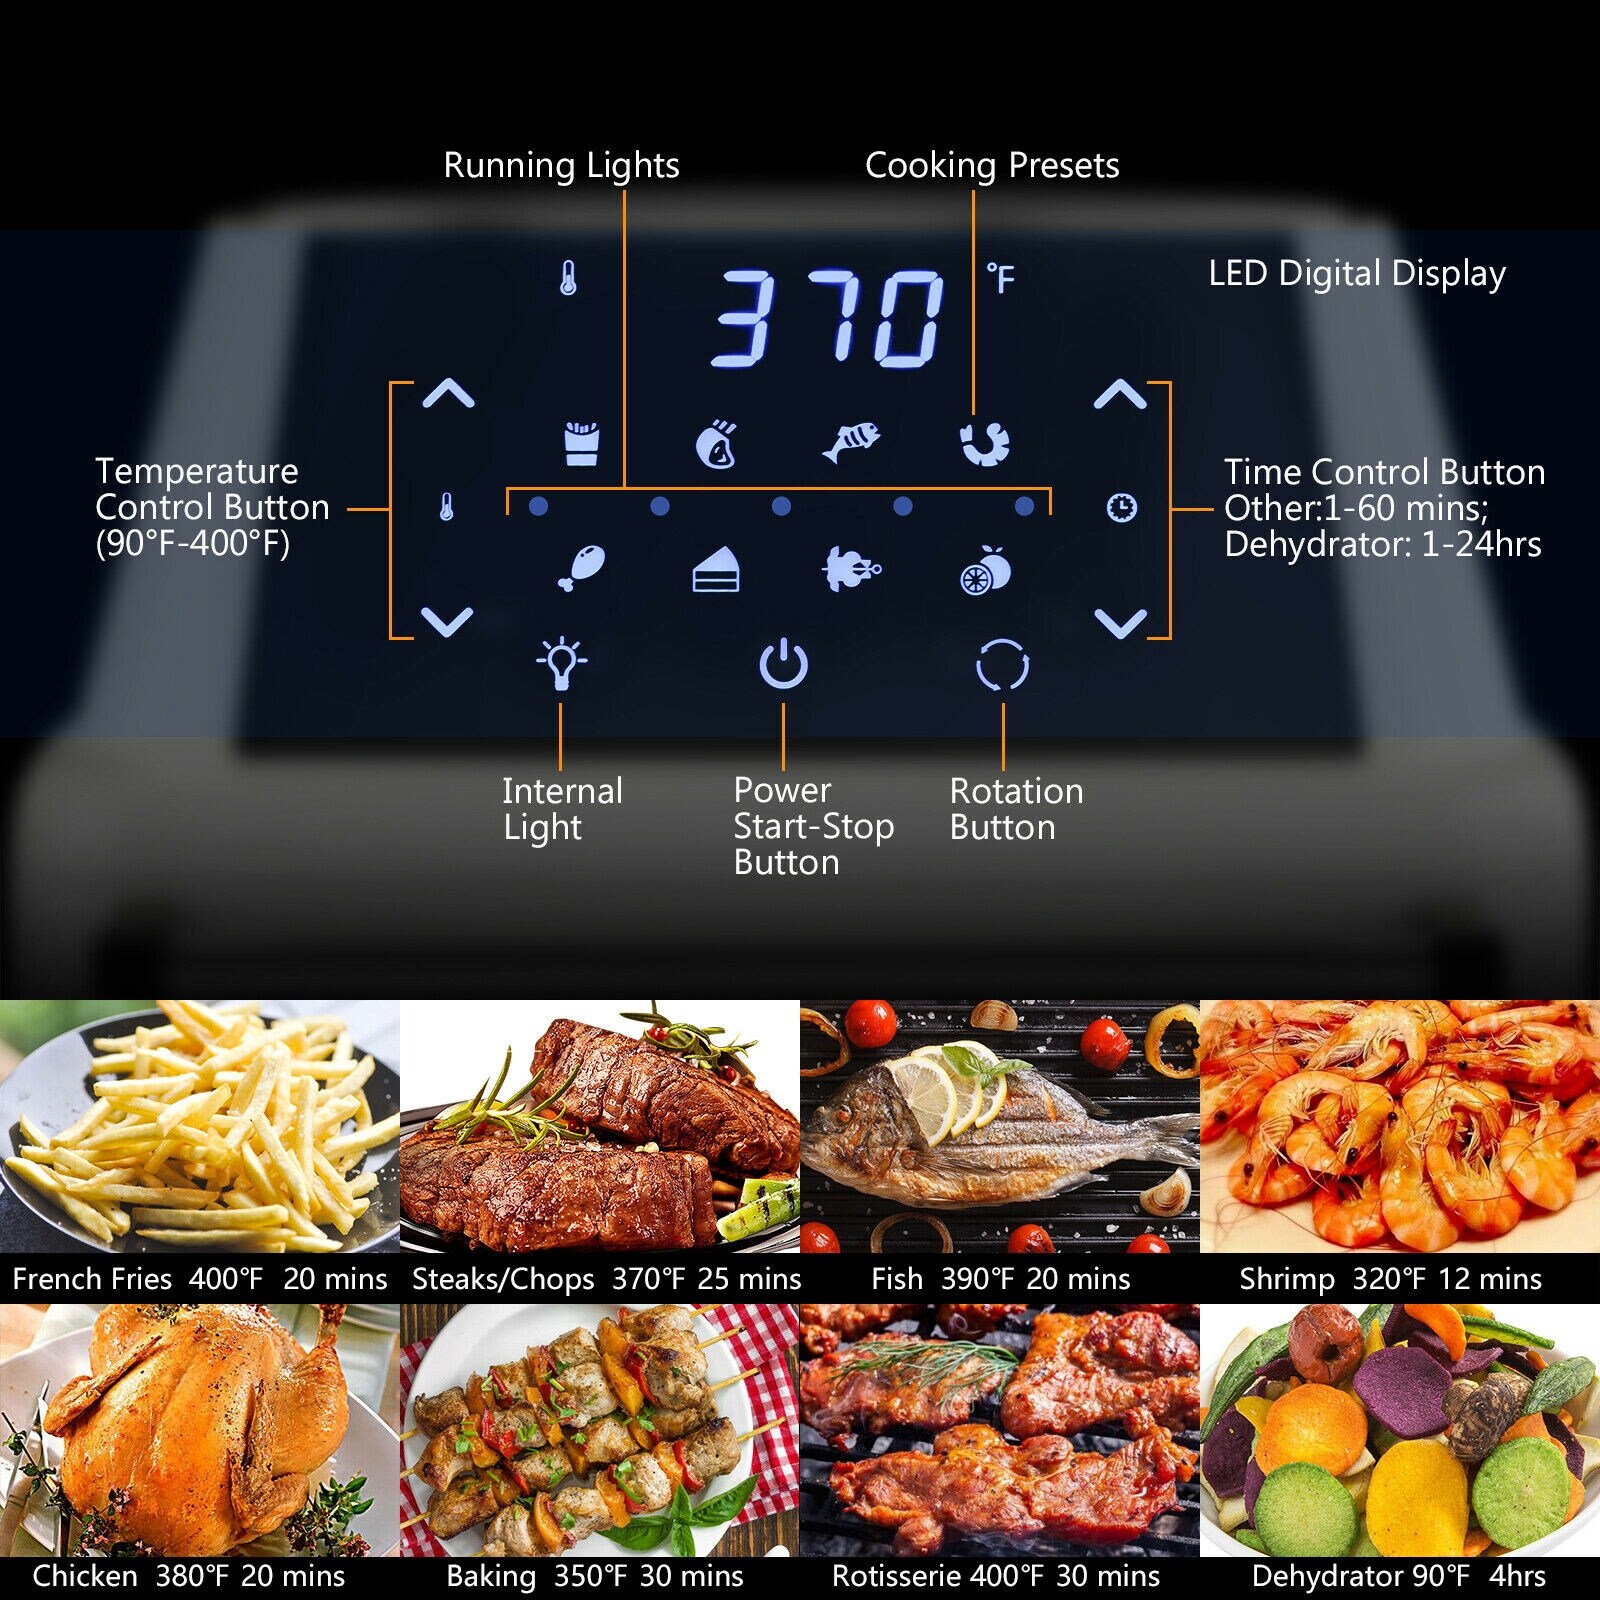 Costway 6.5 Liter Air Fryer Functions & Smart Touch Screen & Reviews